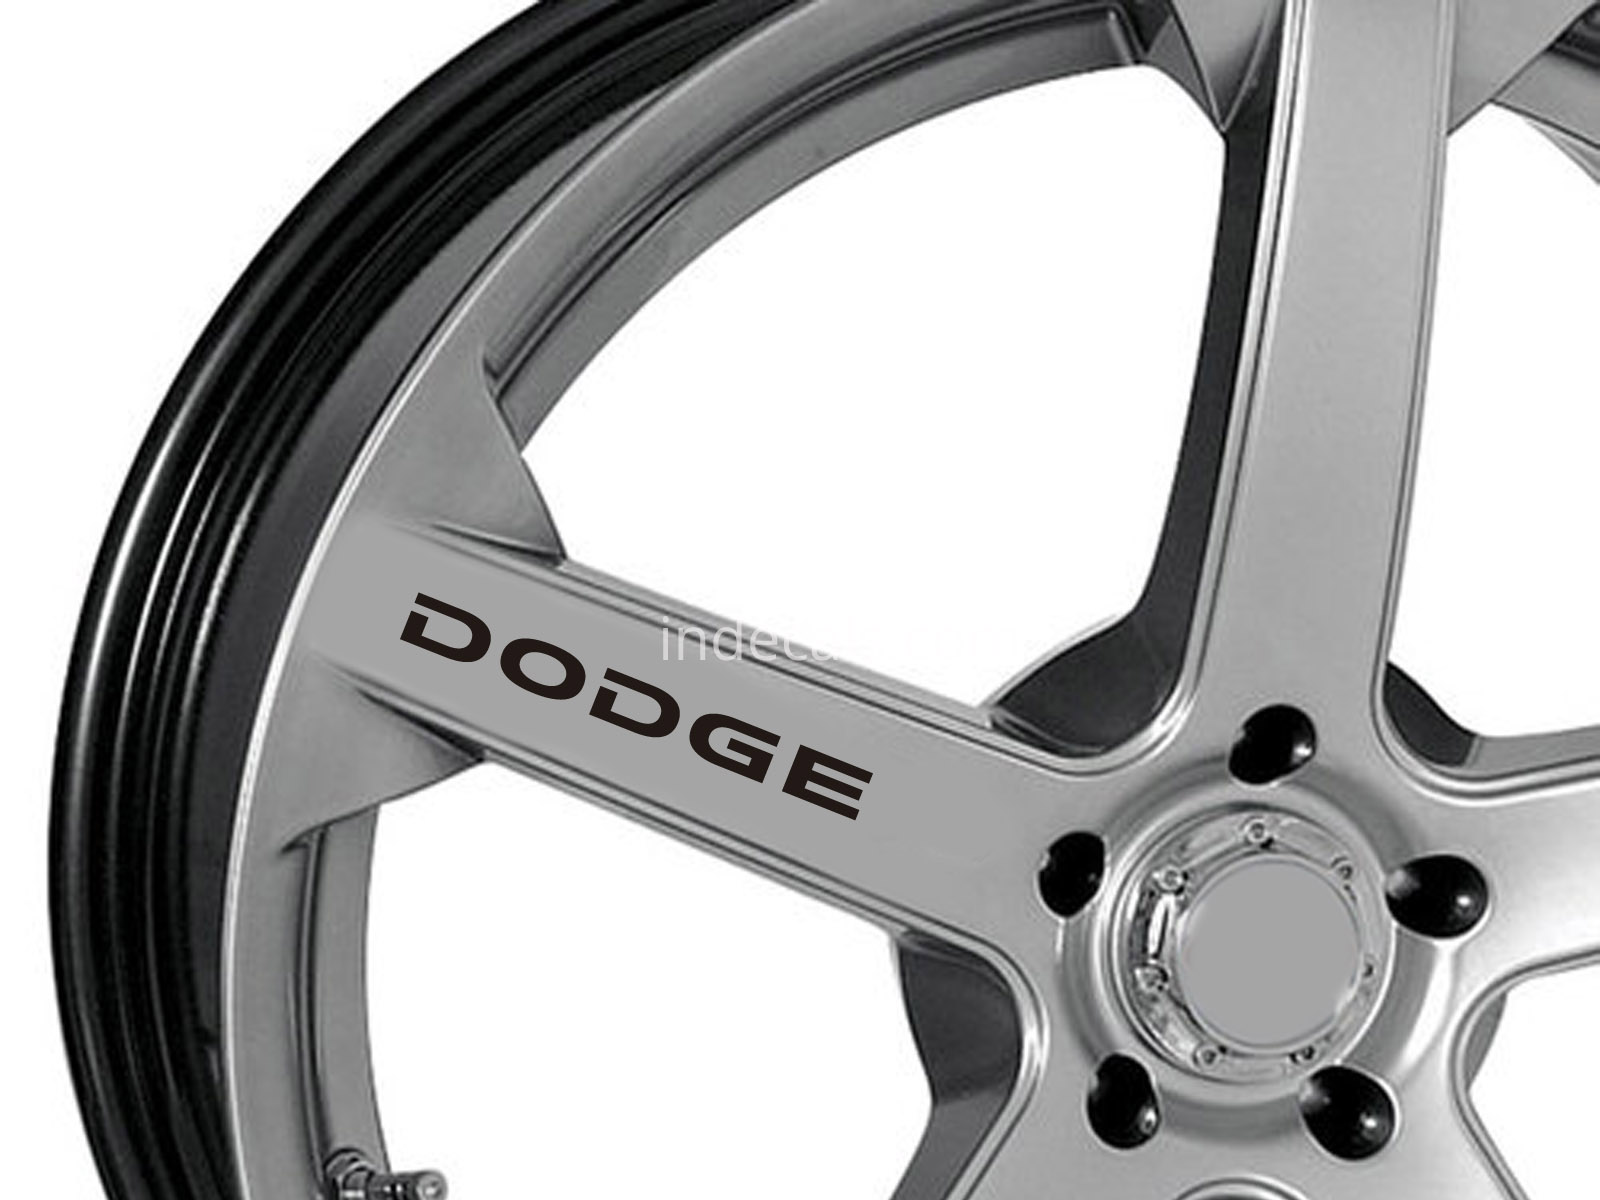 6 x Dodge Stickers for Wheels - Black